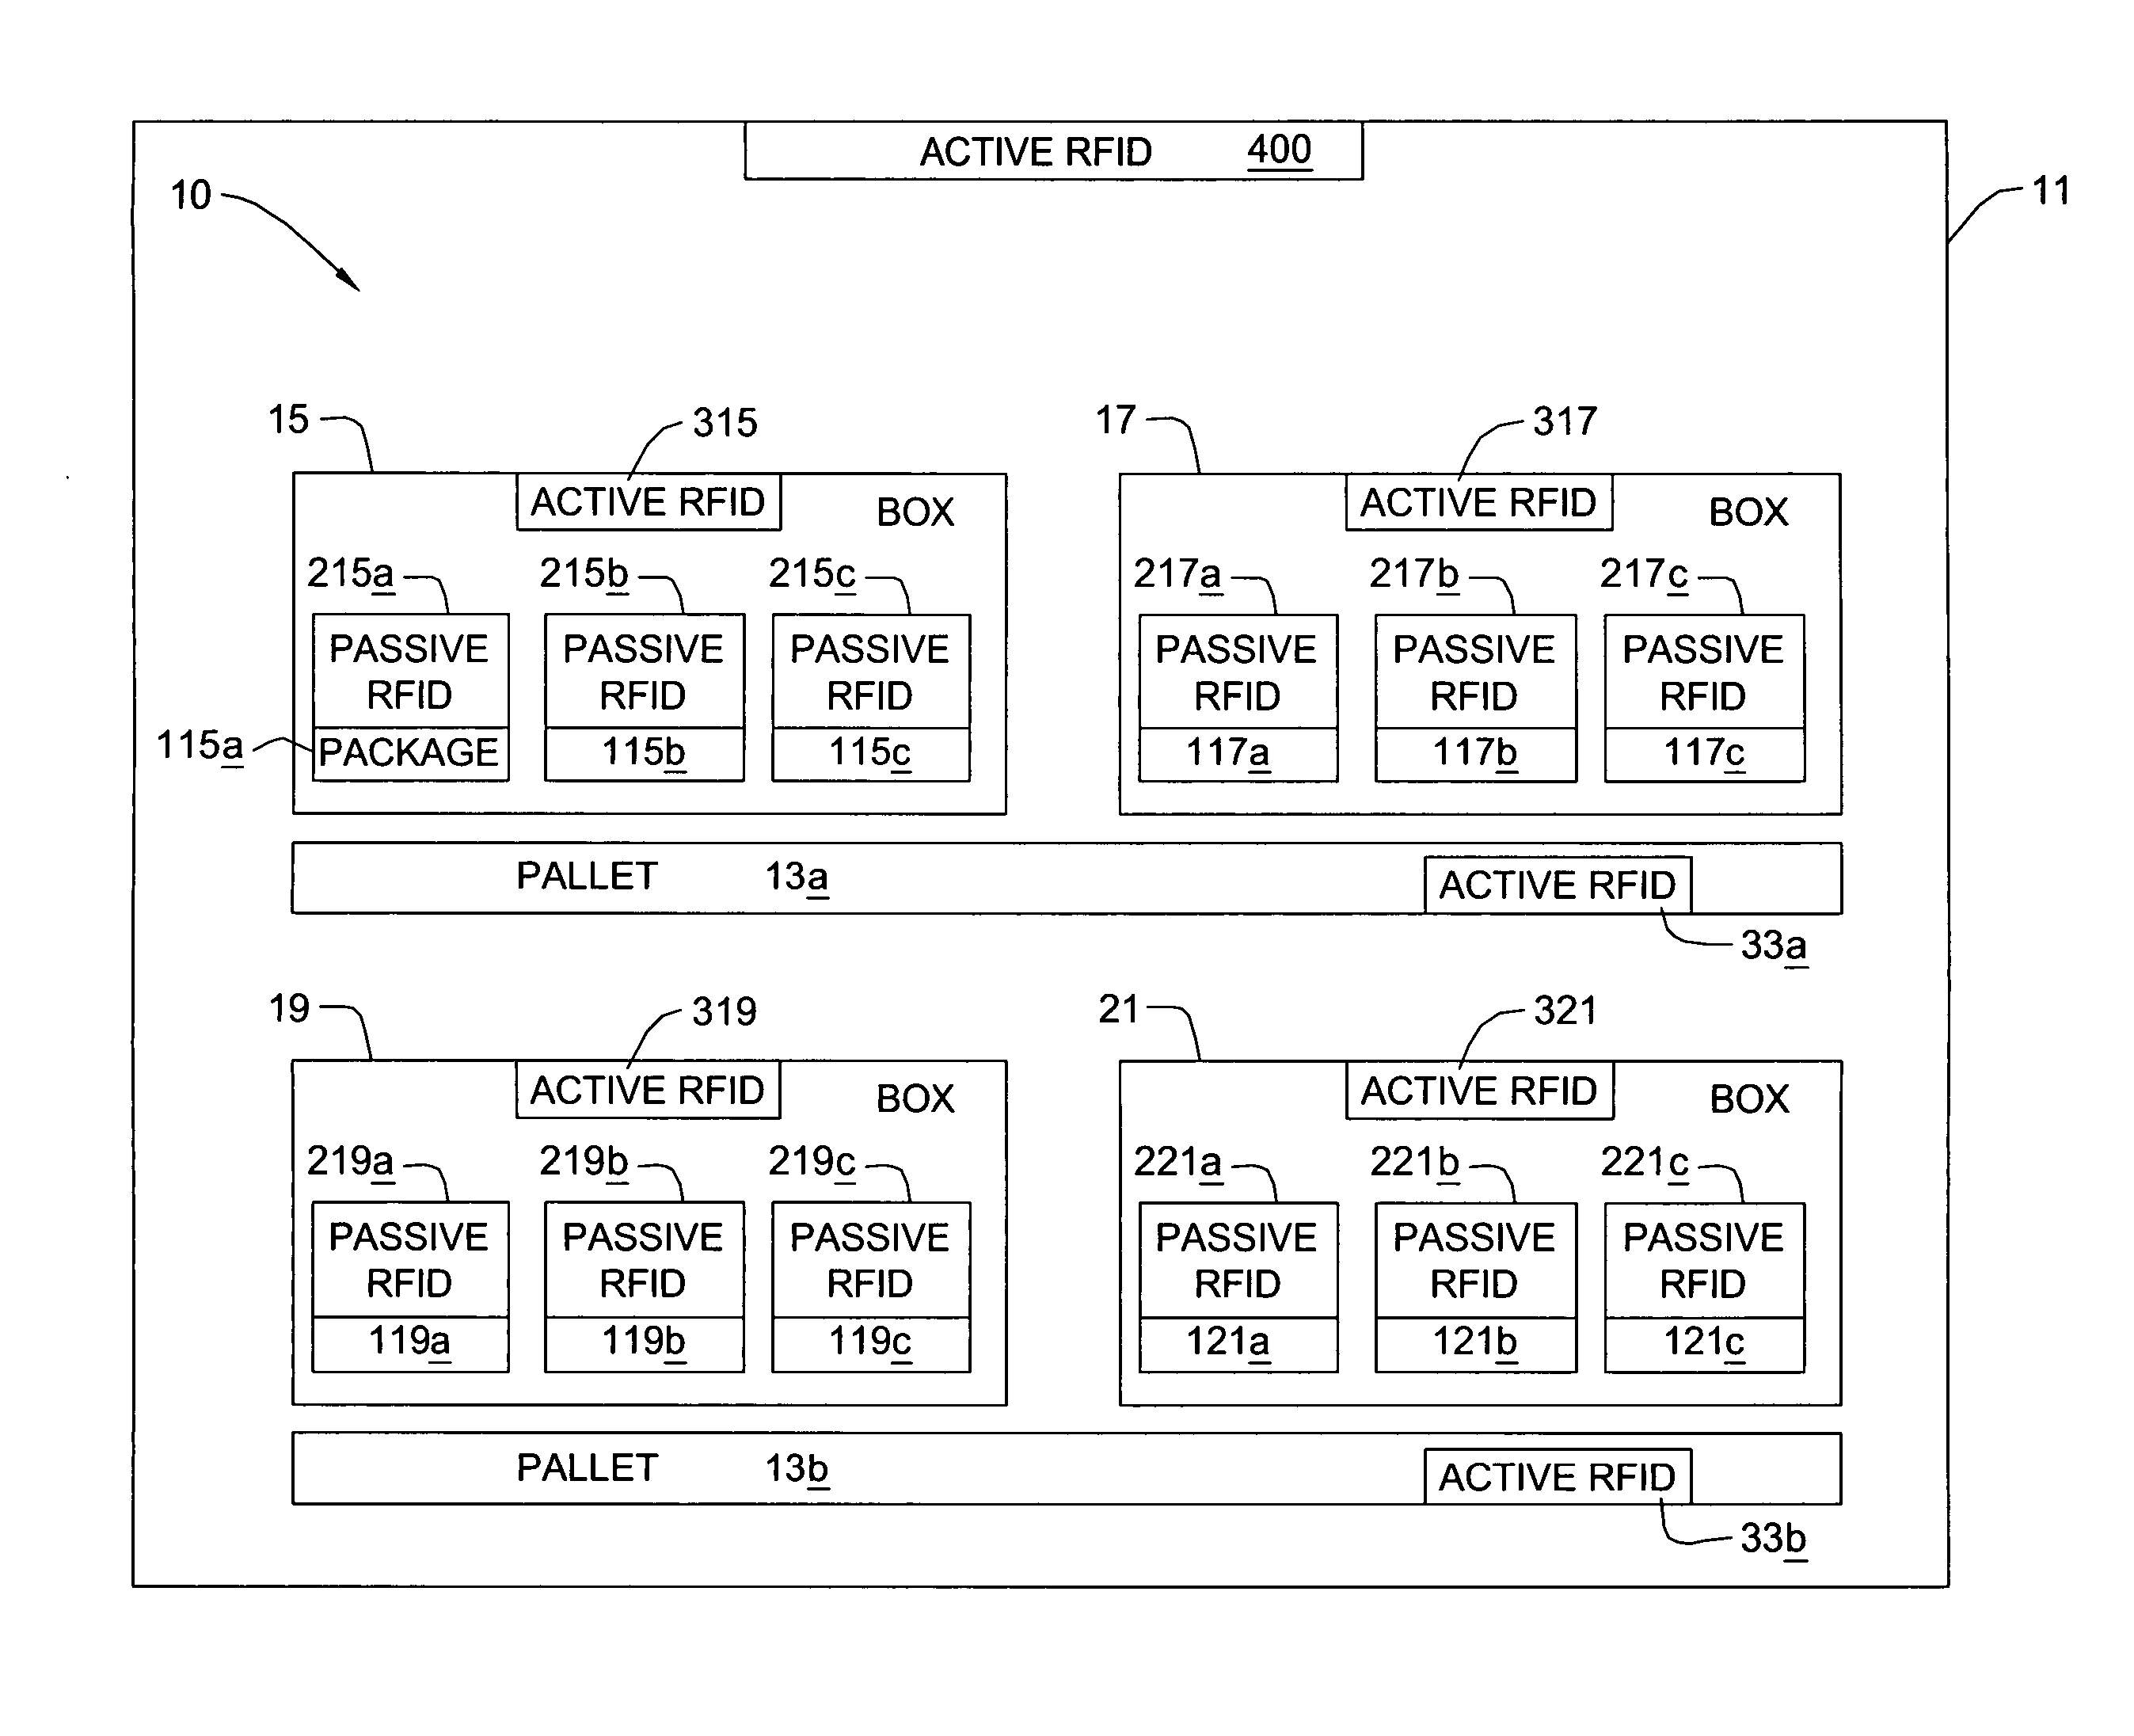 System and method to track inventory using RFID tags